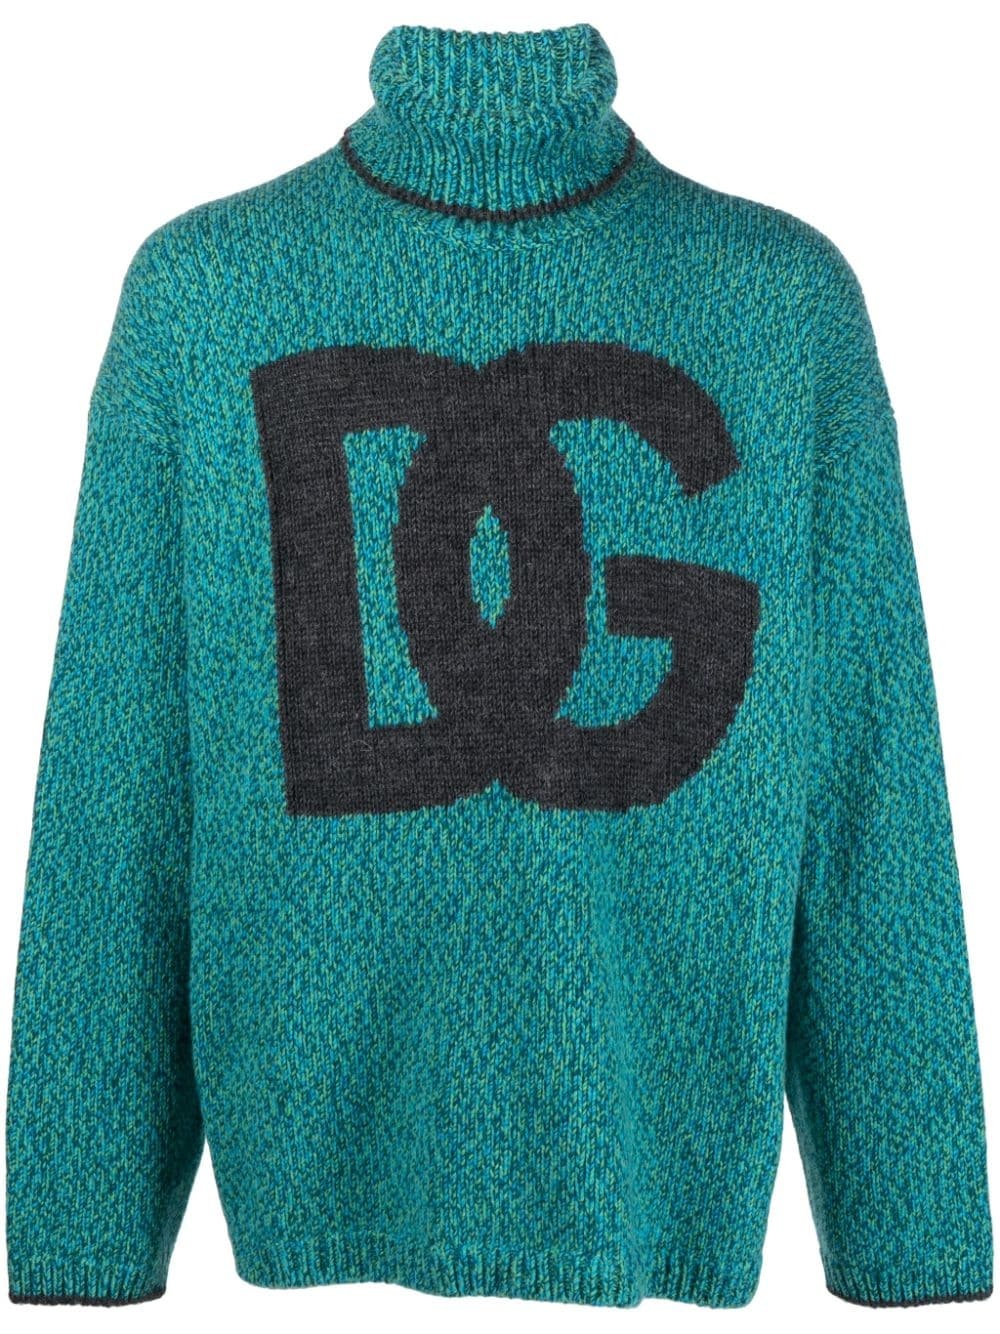 Sweater with logo - 1